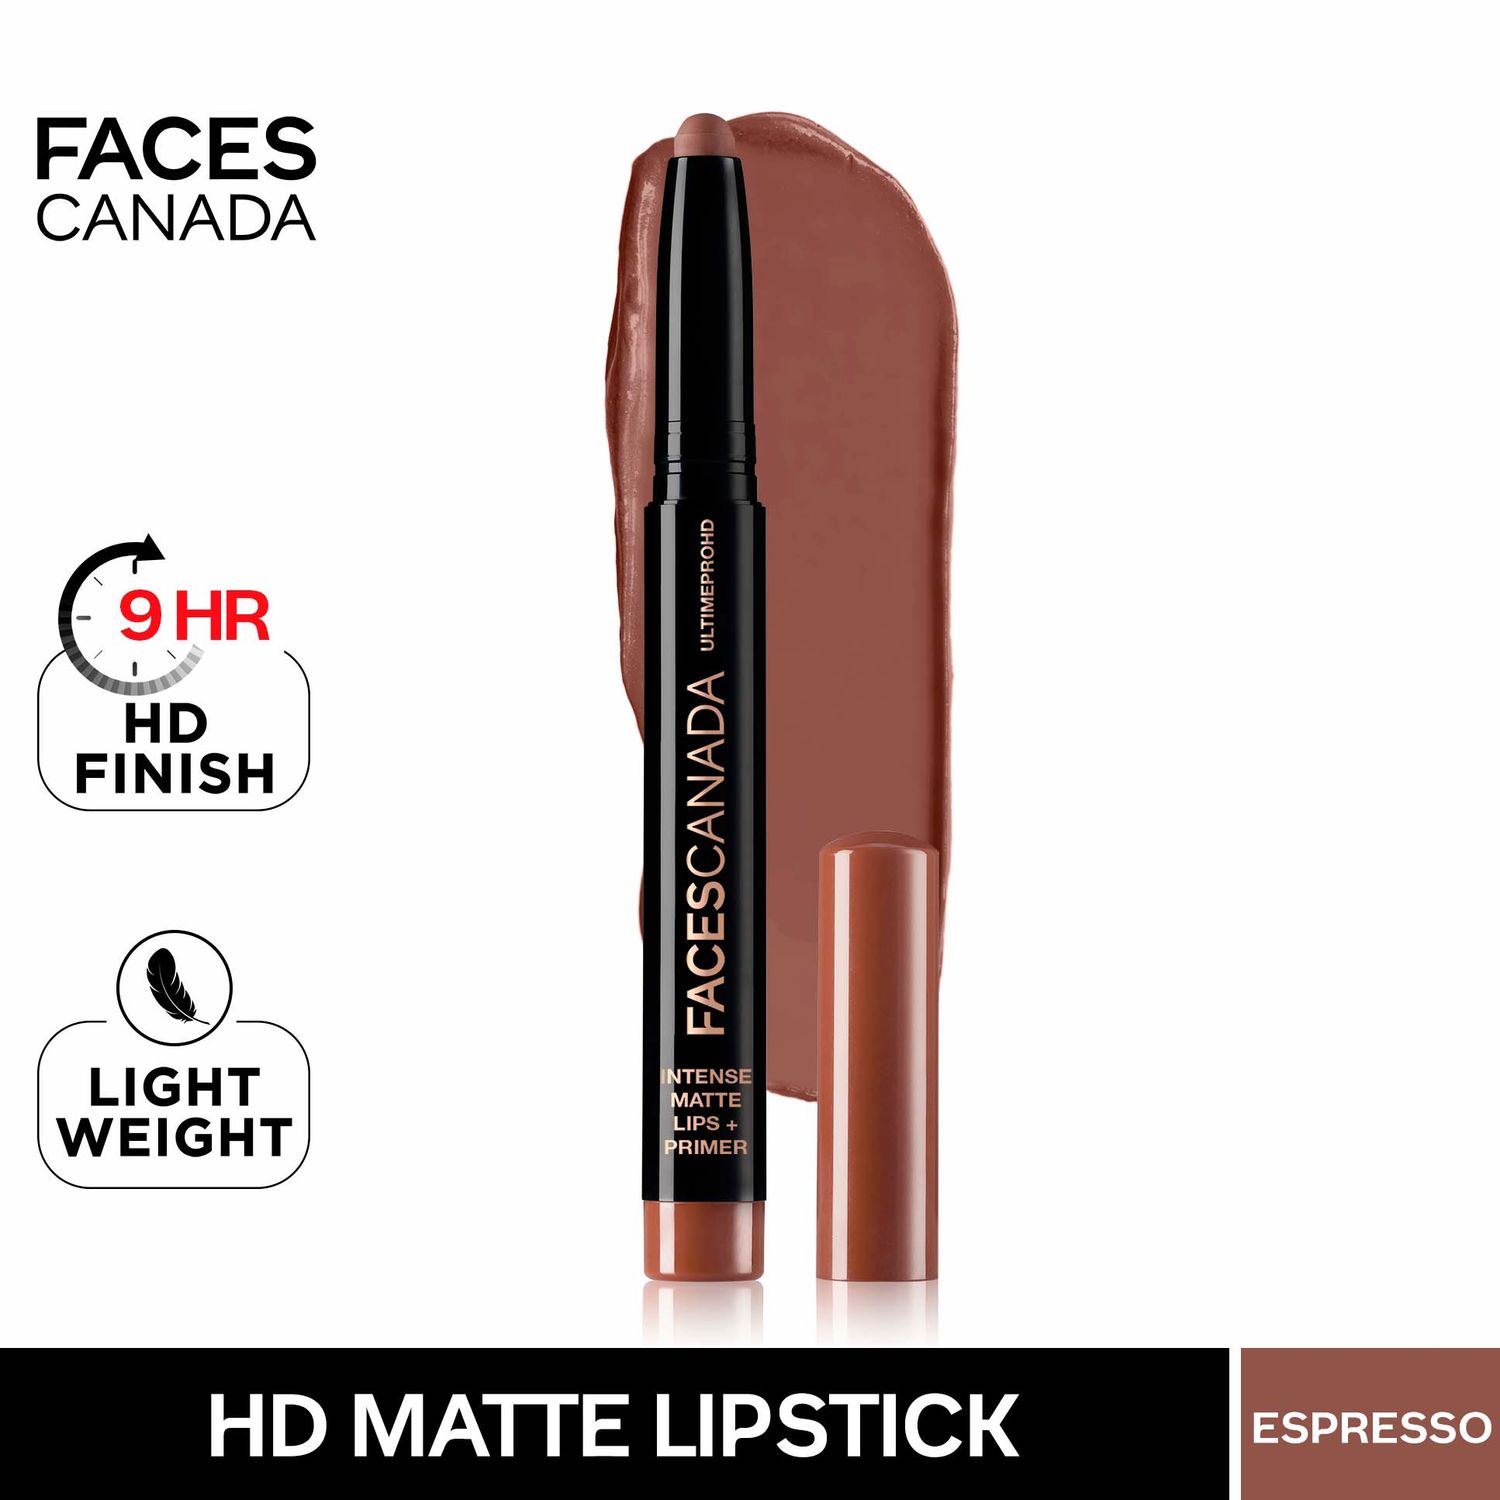 Faces Canada HD Intense Matte Lipstick | Feather light comfort | 10 hrs stay| Primer infused | Flawless HD finish | Made in Germany | Espresso 1.4g